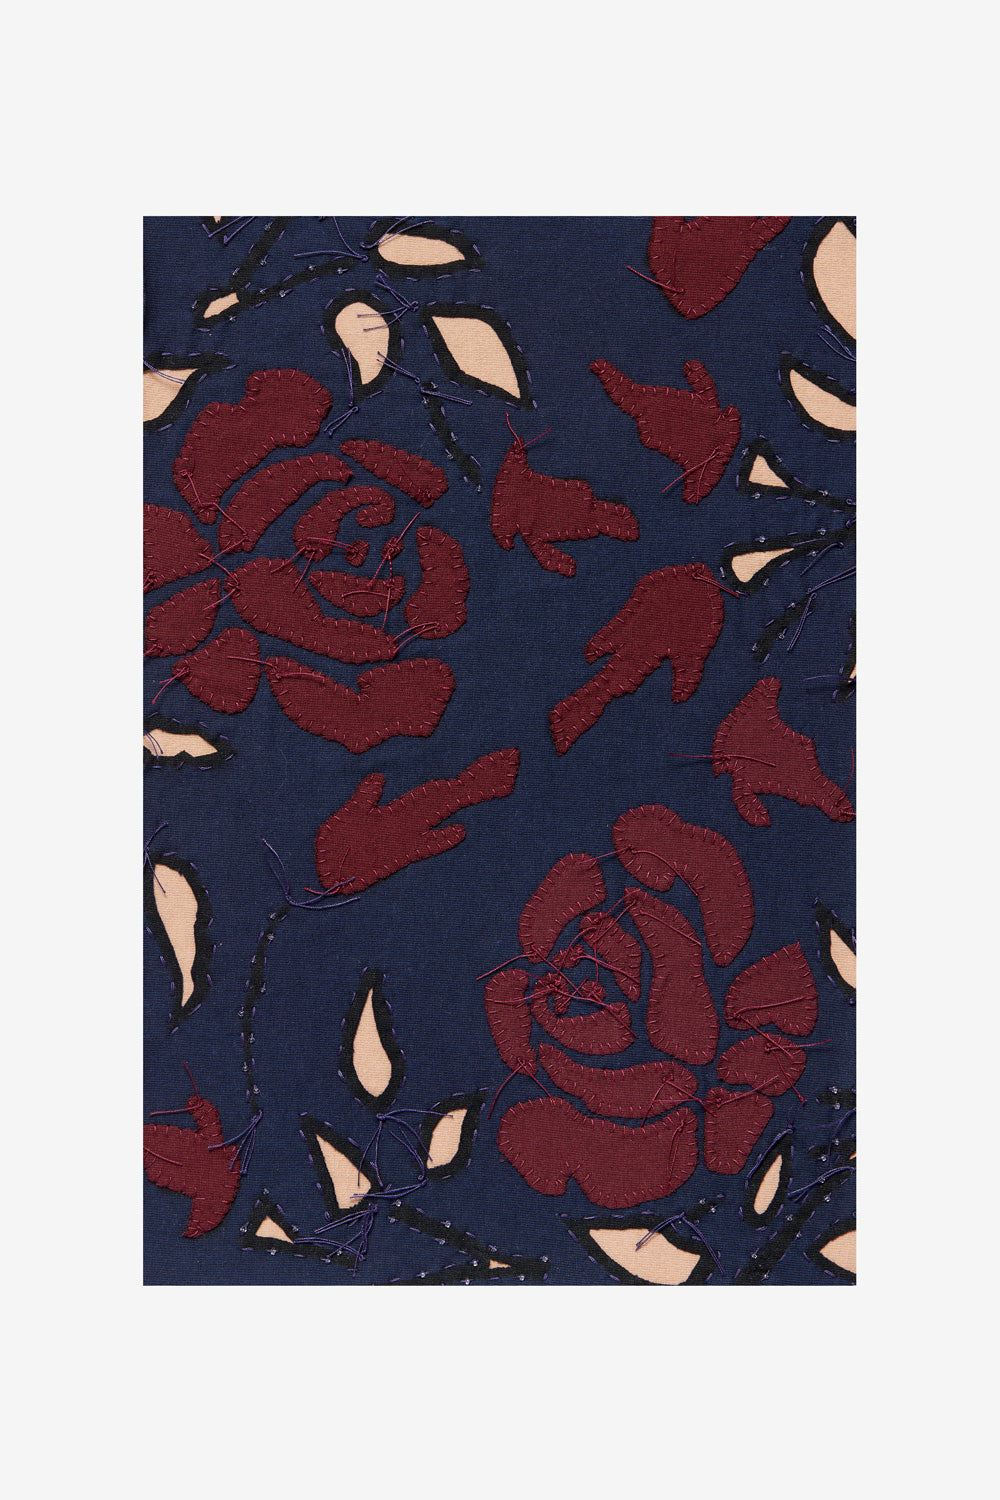 Fabric Swatch with Rose repeat stencil in navy, plum, and ballet. Made with 100% organic cotton.